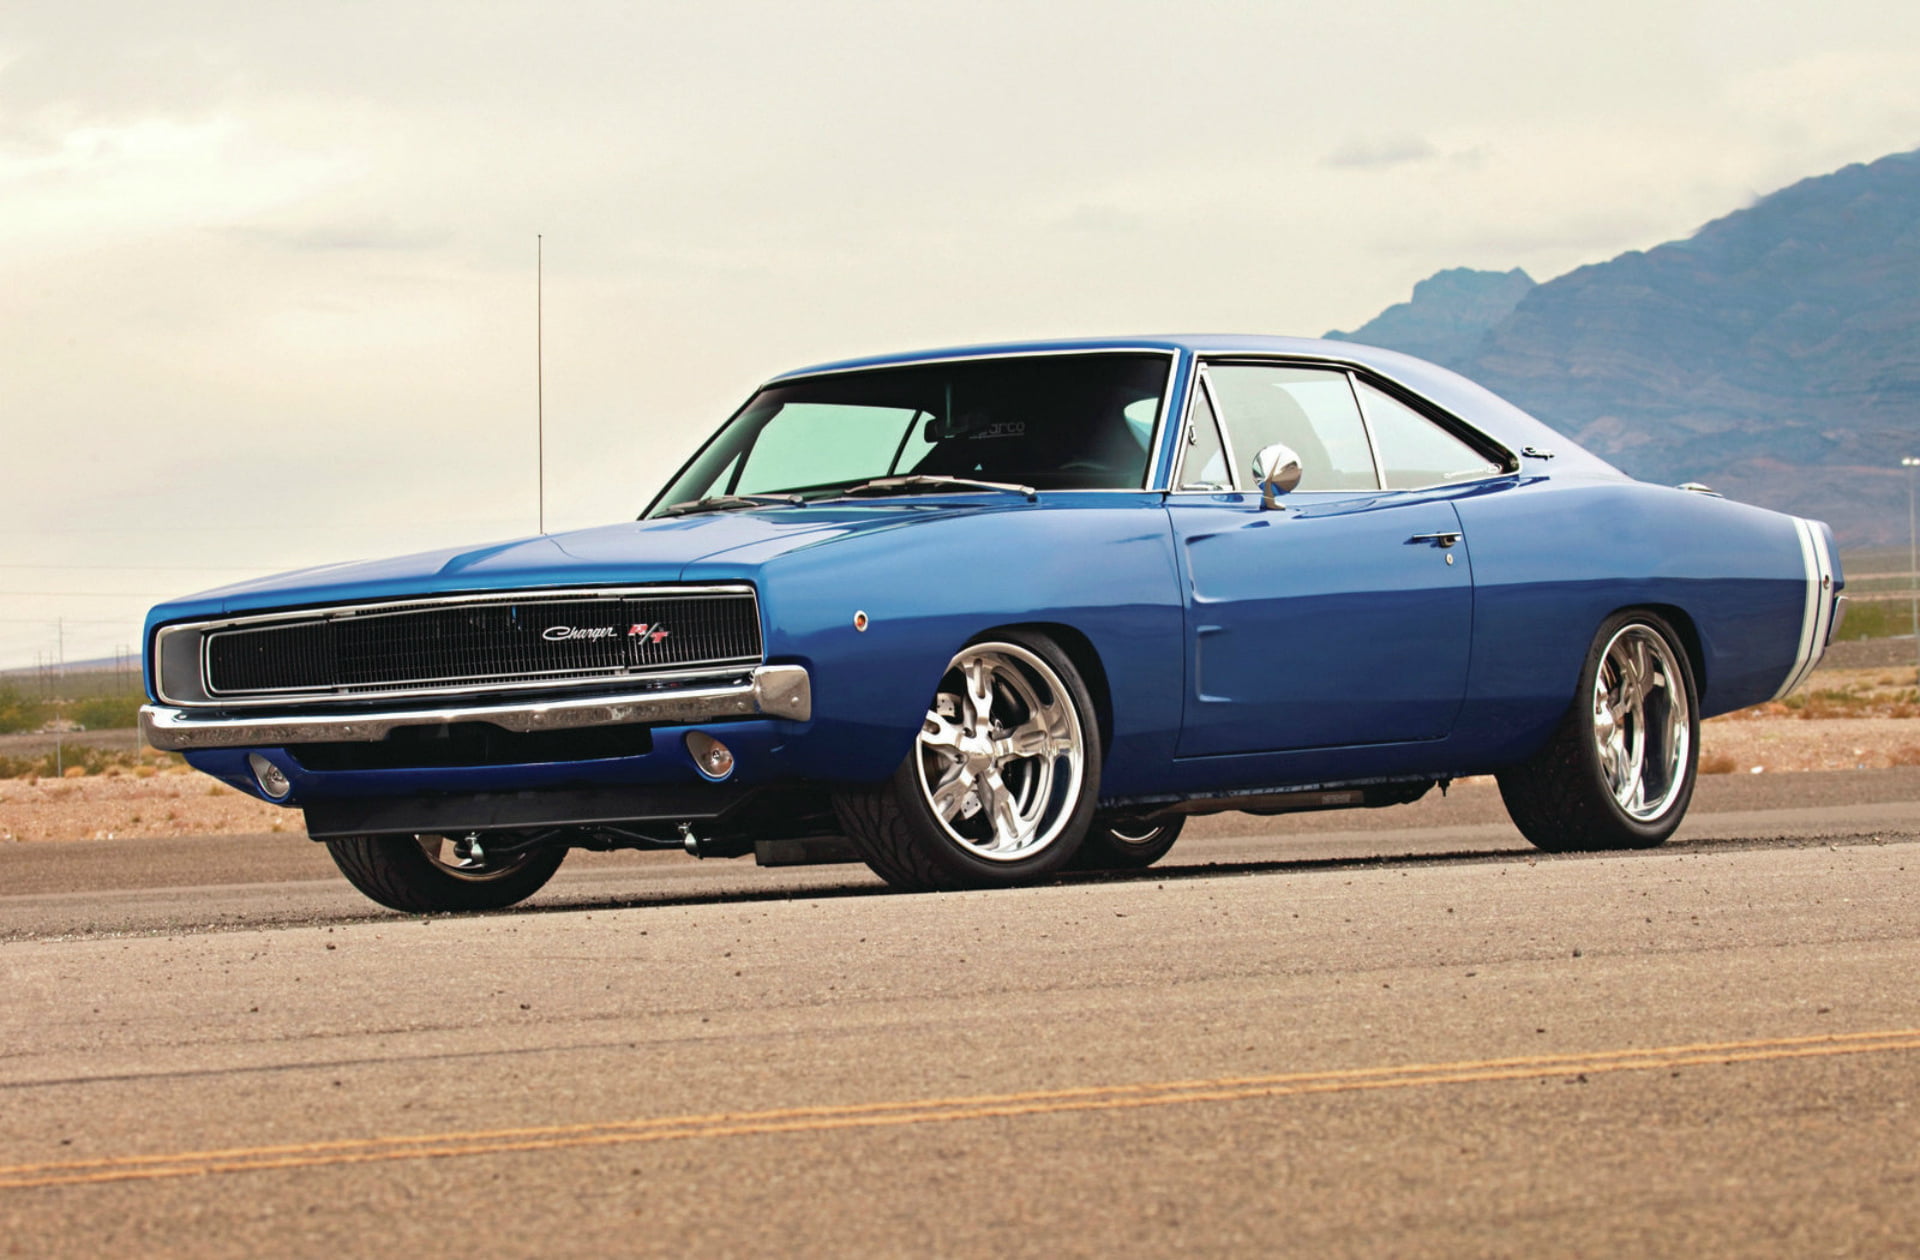 blue coupe, car, Dodge, Dodge Charger, muscle cars, blue cars